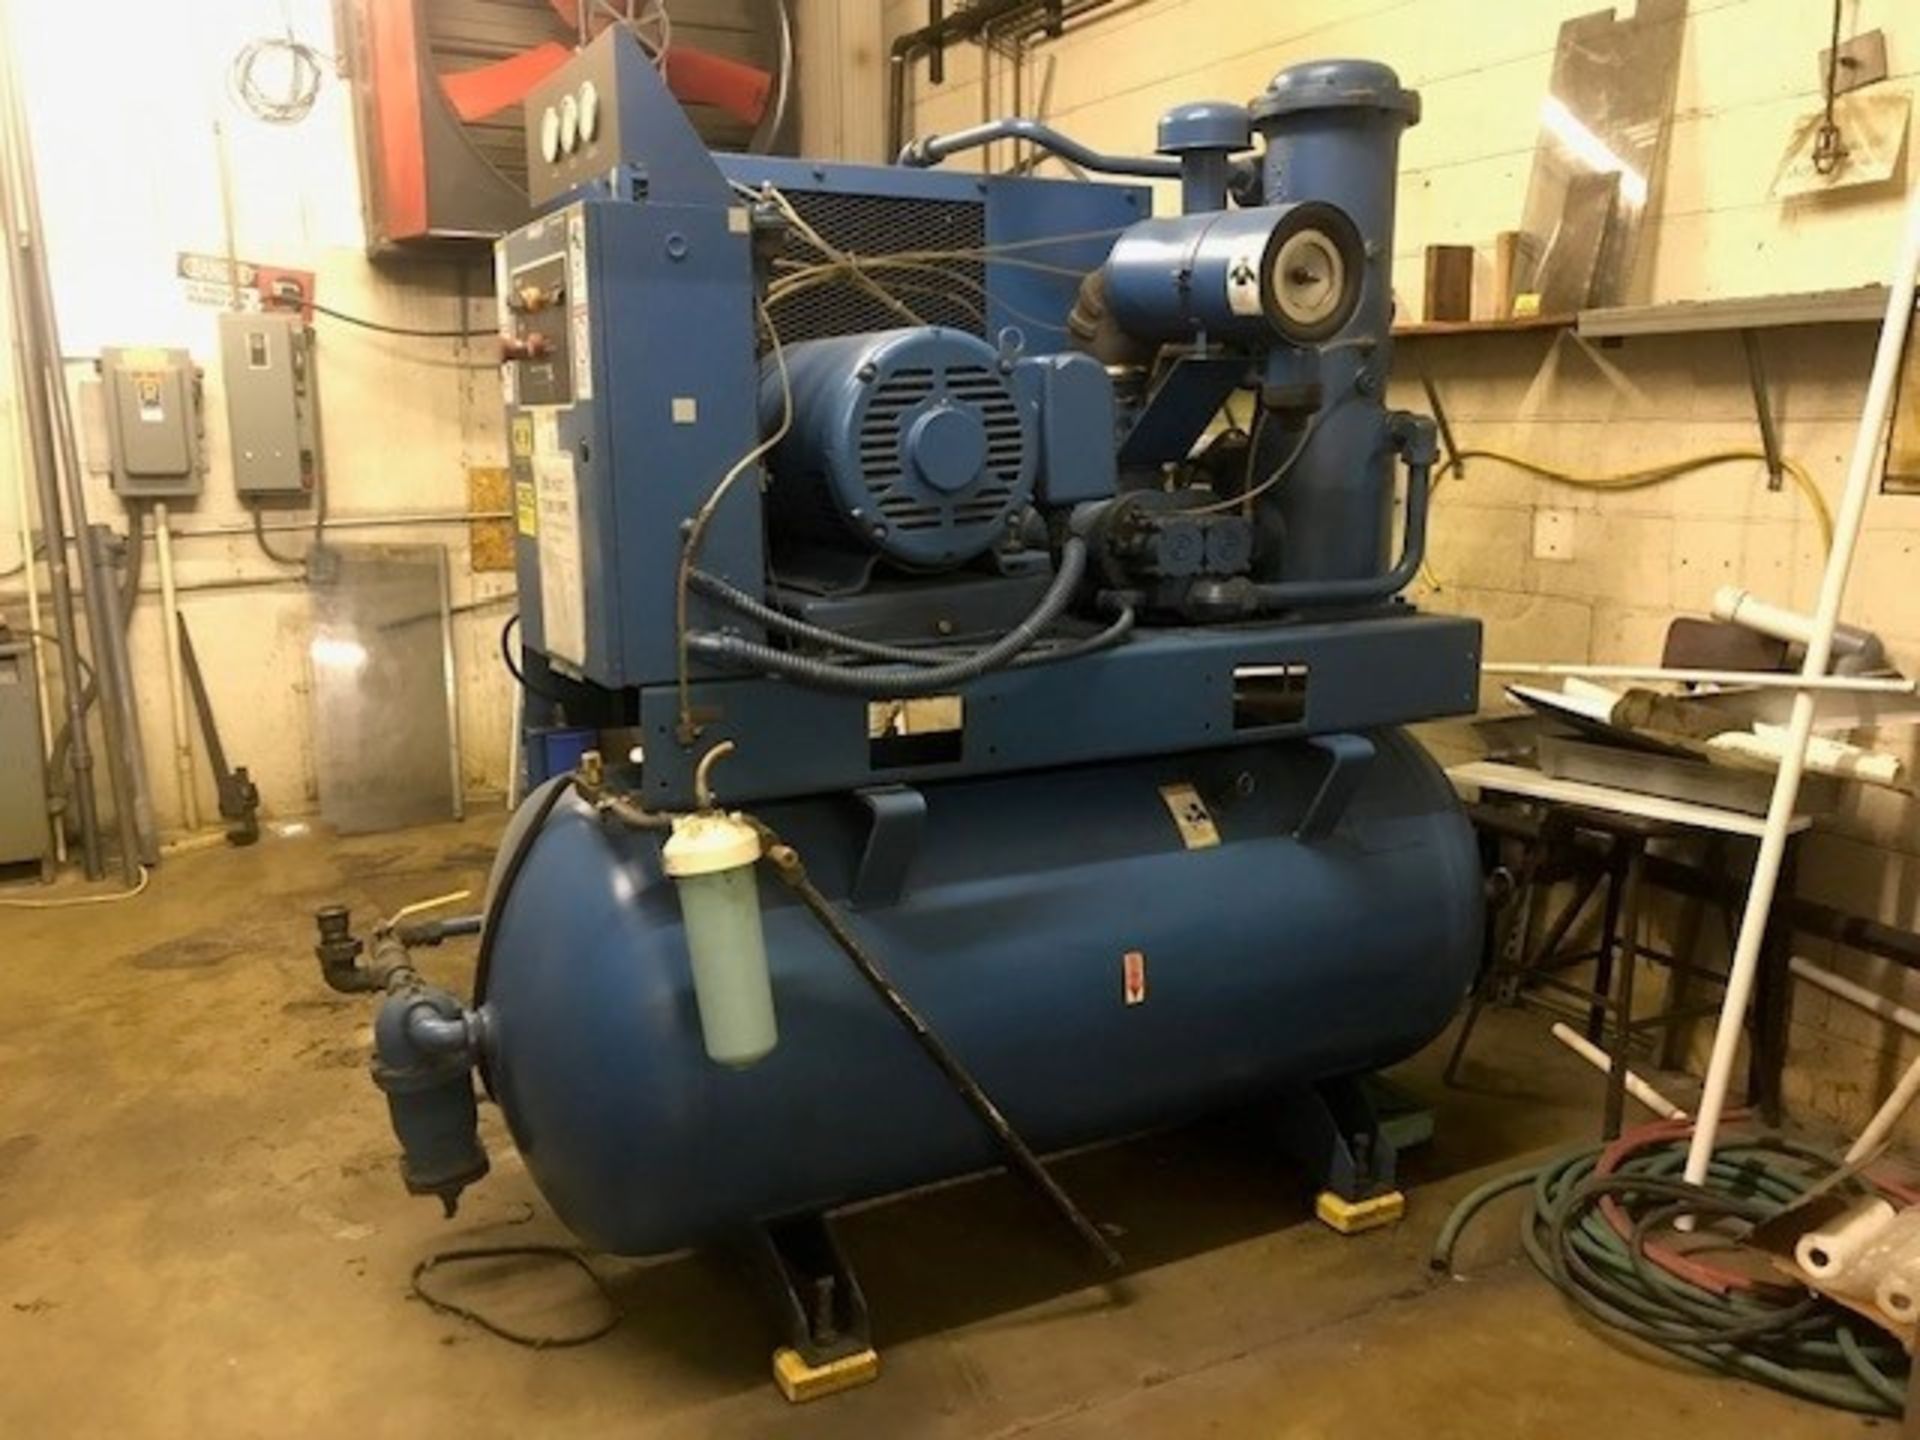 Quincy Screw Air Compressor, Water Cooled, Hrs. 82045.2 (Load Fee $300) (Located Union Grove, WI) - Image 4 of 5